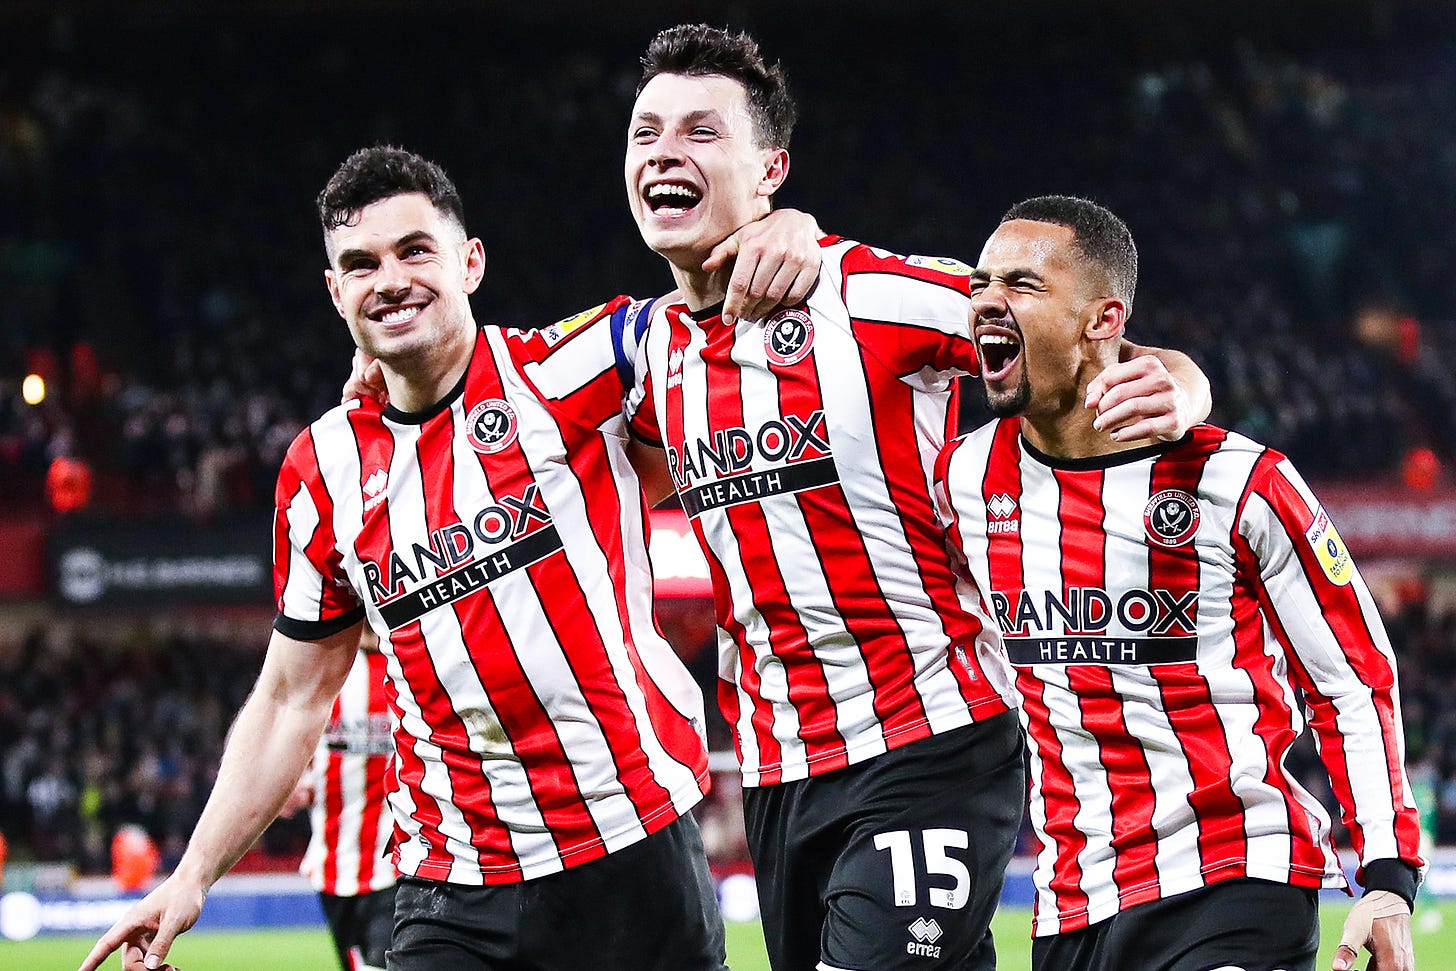 Sheffield United promoted back to the Premier League